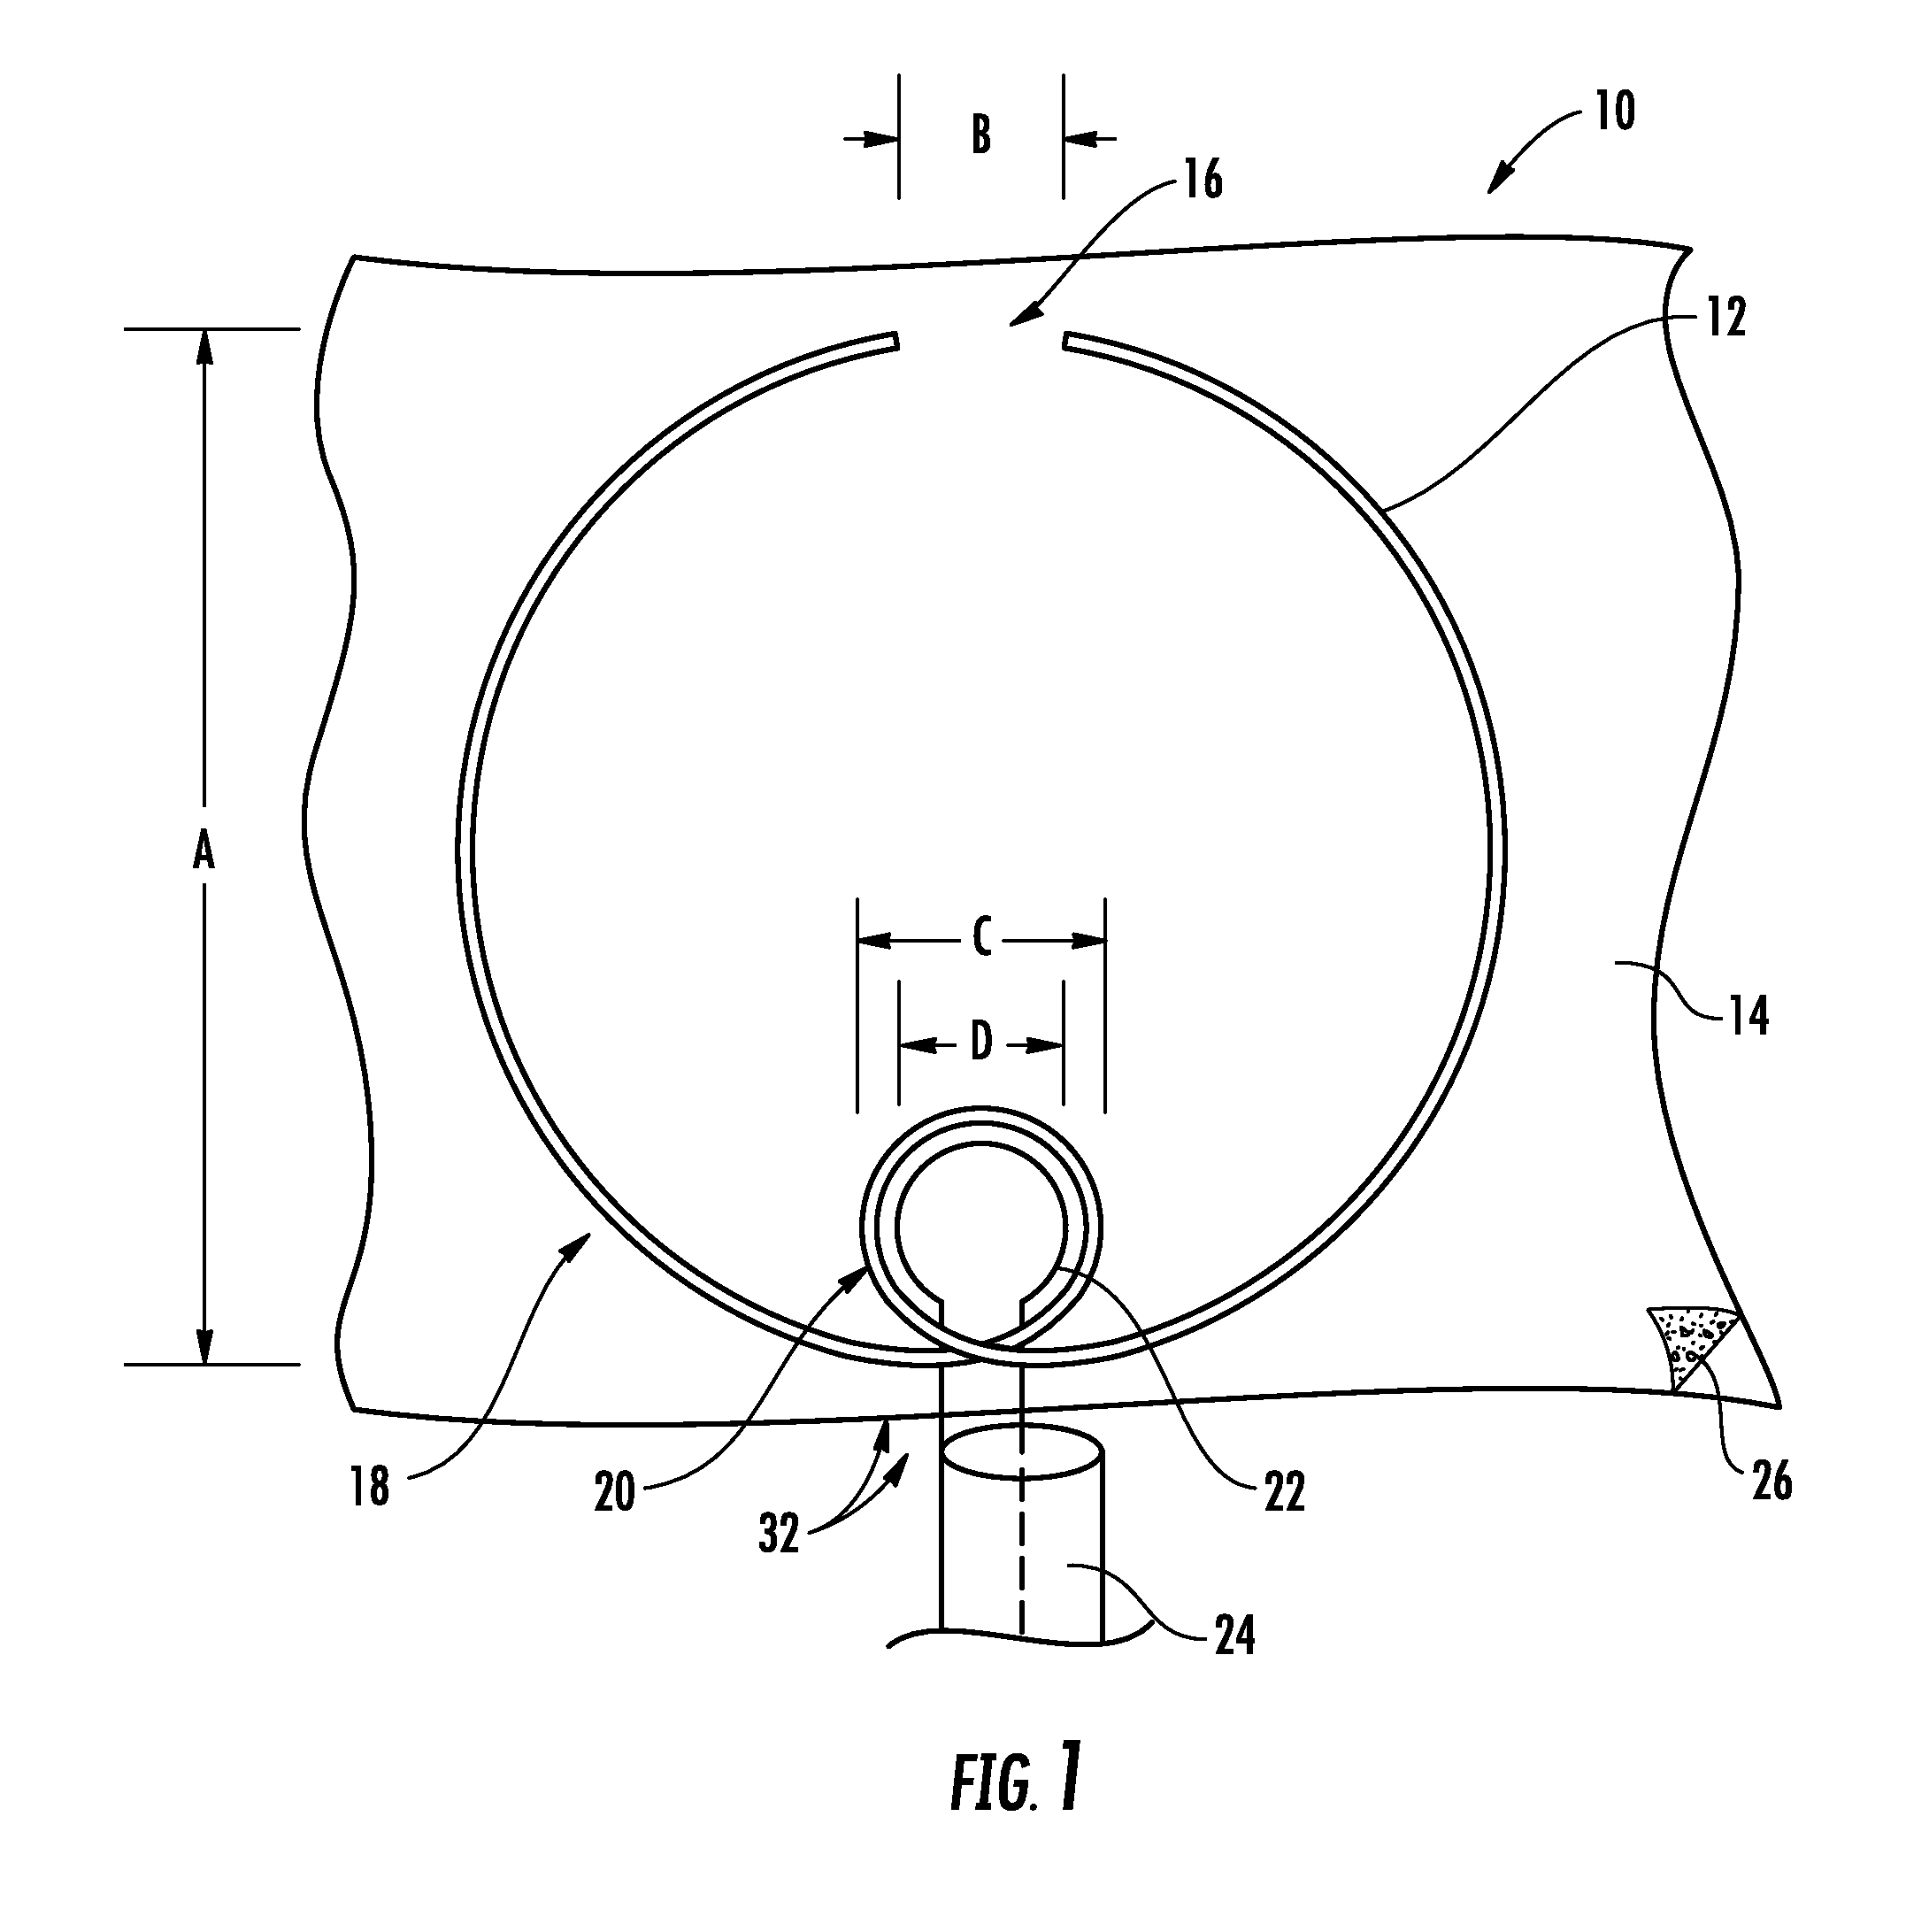 Planar communications antenna having an epicyclic structure and isotropic radiation, and associated methods